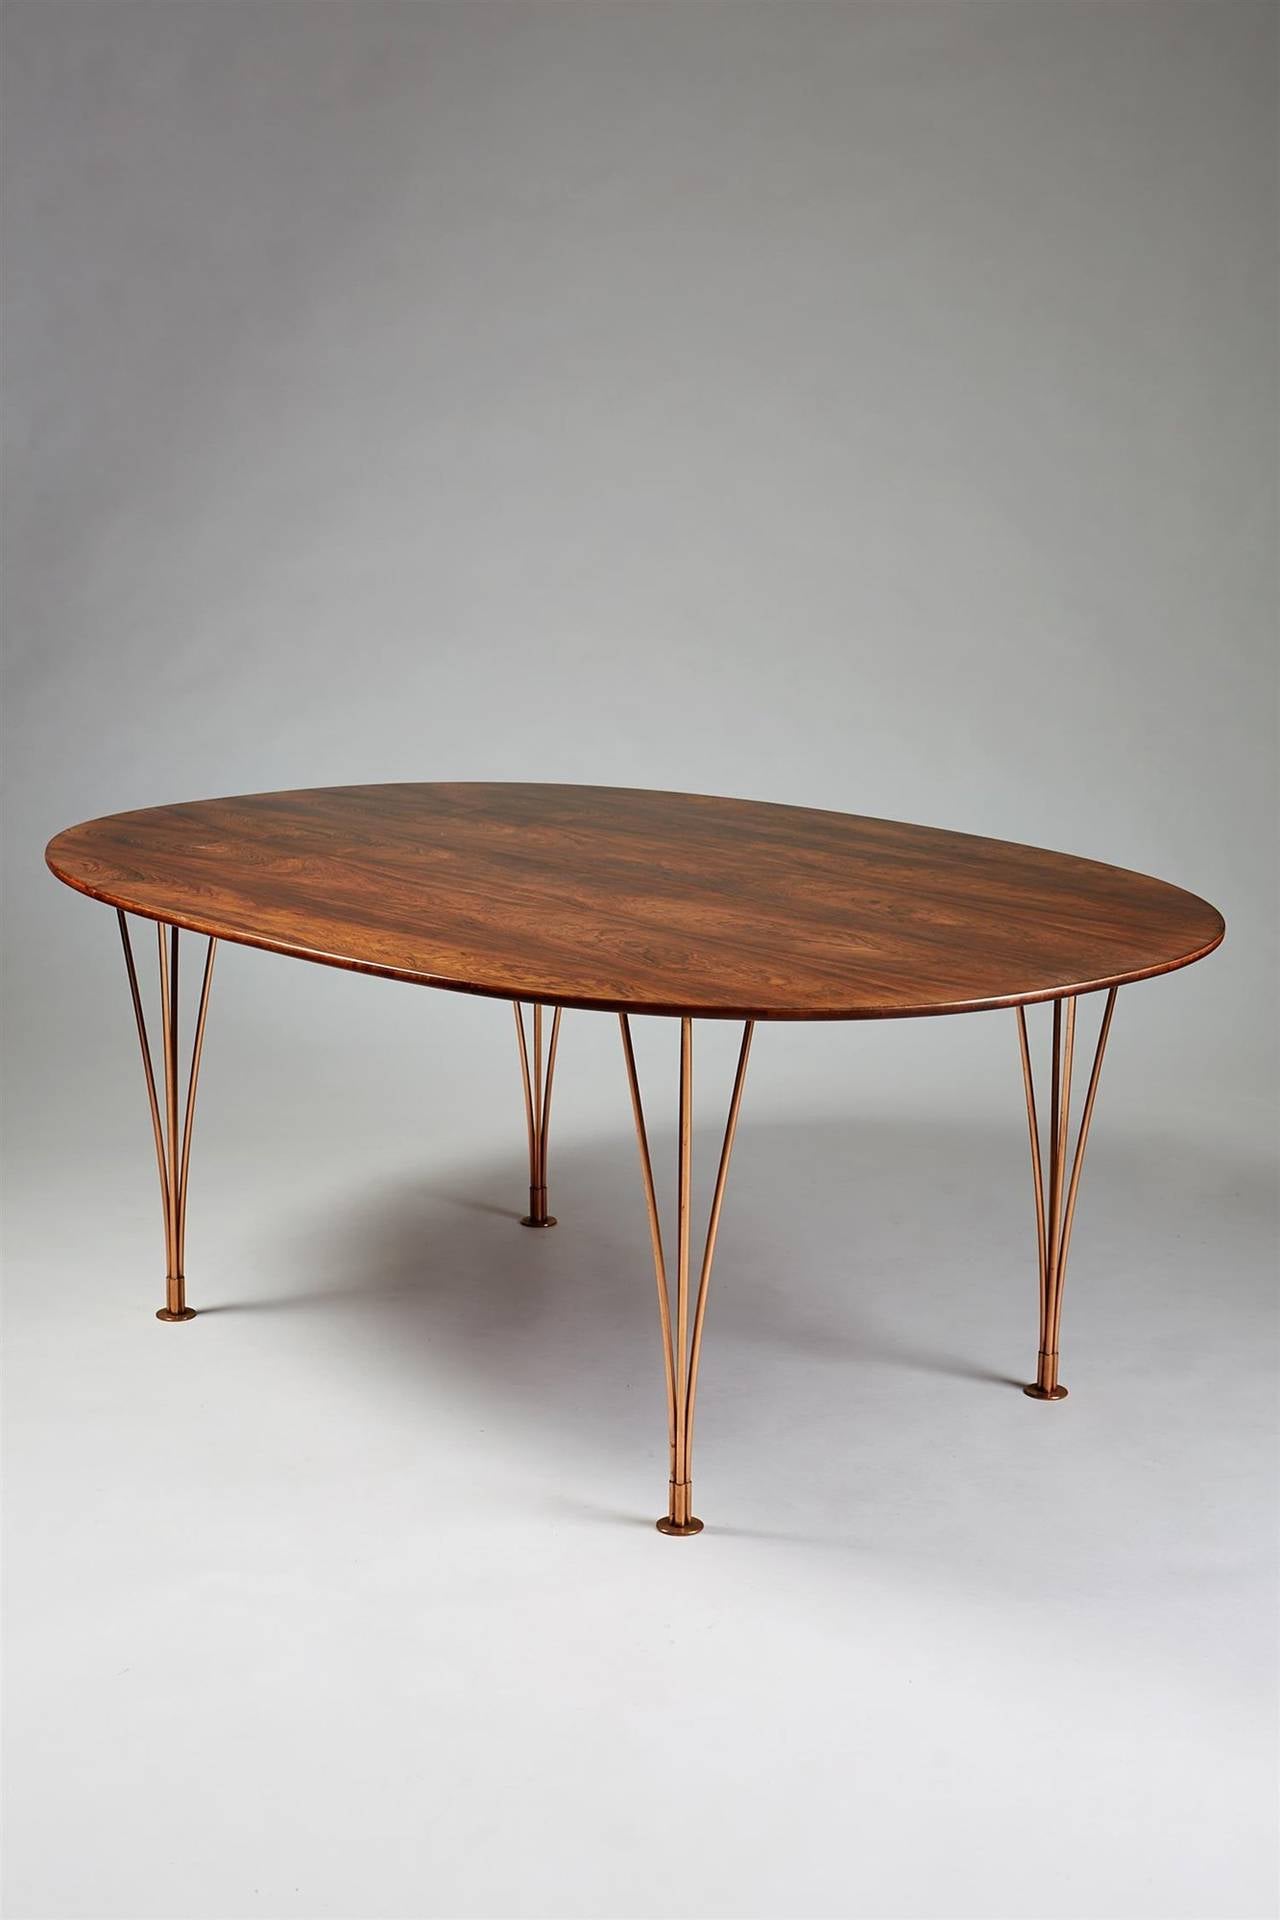 Dining table super ellipse, designed by Bruno Mathsson and Piet Hein, Karl Mathsson, Sweden, 1964.
Rosewood and very rare copper legs.